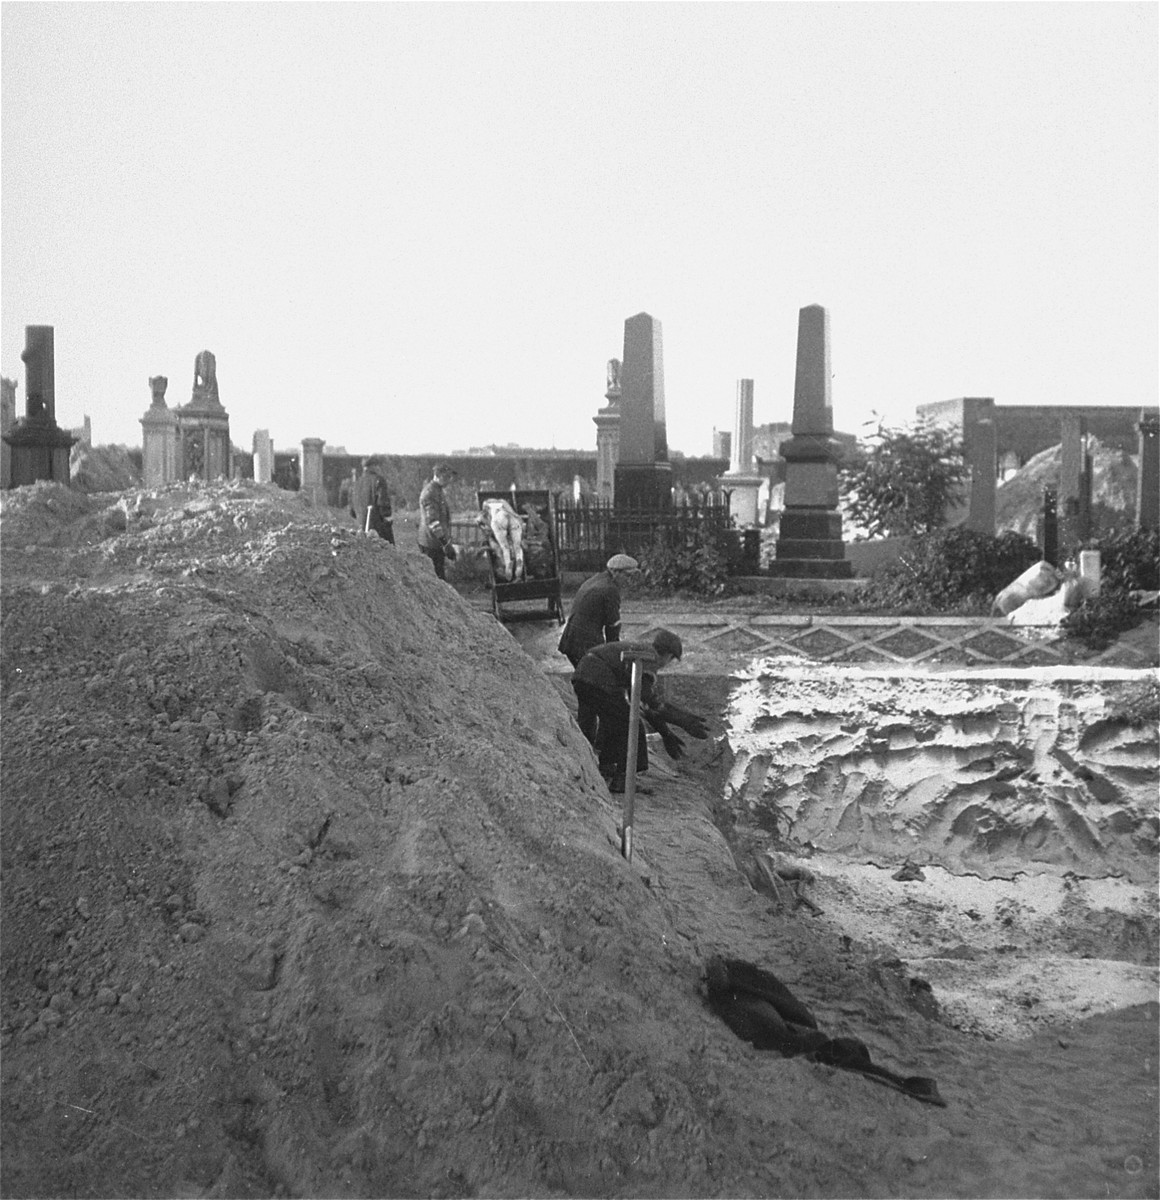 Gravediggers unload bodies from a cart into a mass grave in the Warsaw ghetto cemetery.  

Joest's caption reads: "The corpse-carriers took the naked bodies from the cart and threw them into the grave.  For this work they wore rubber-gloves, which I first thought were made out of wood."